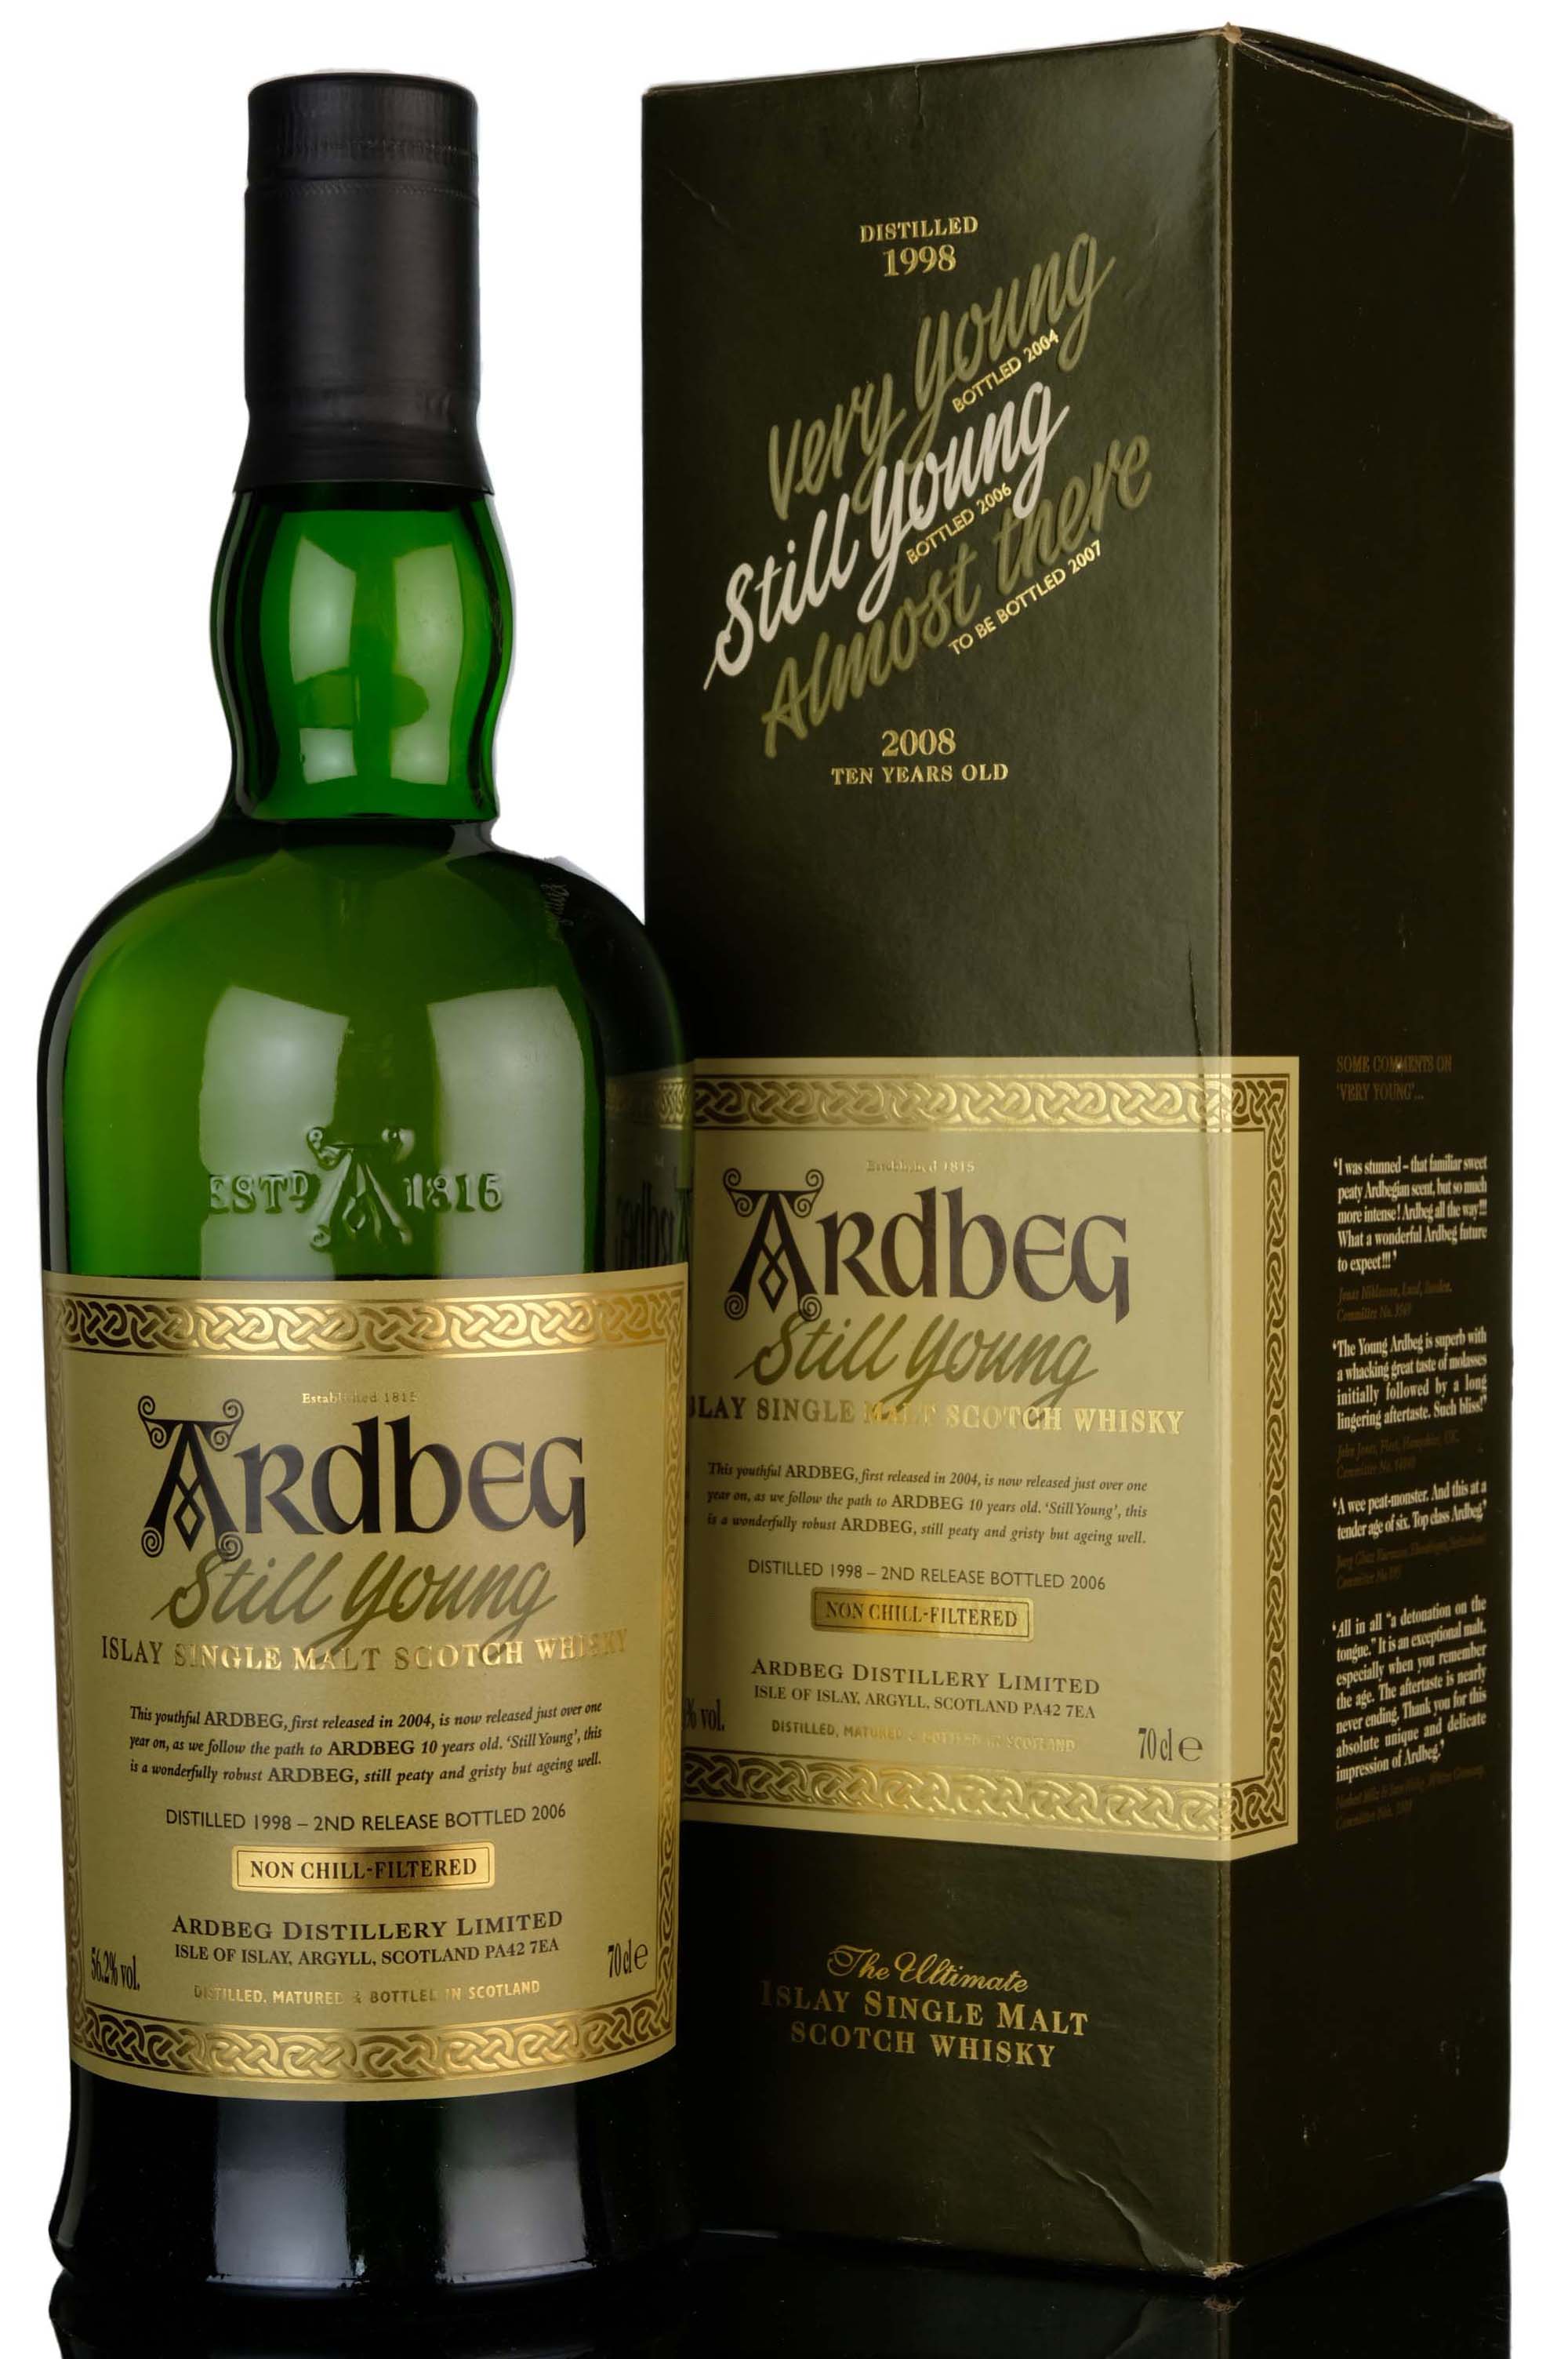 Ardbeg 1998-2006 - Still Young - Second Release